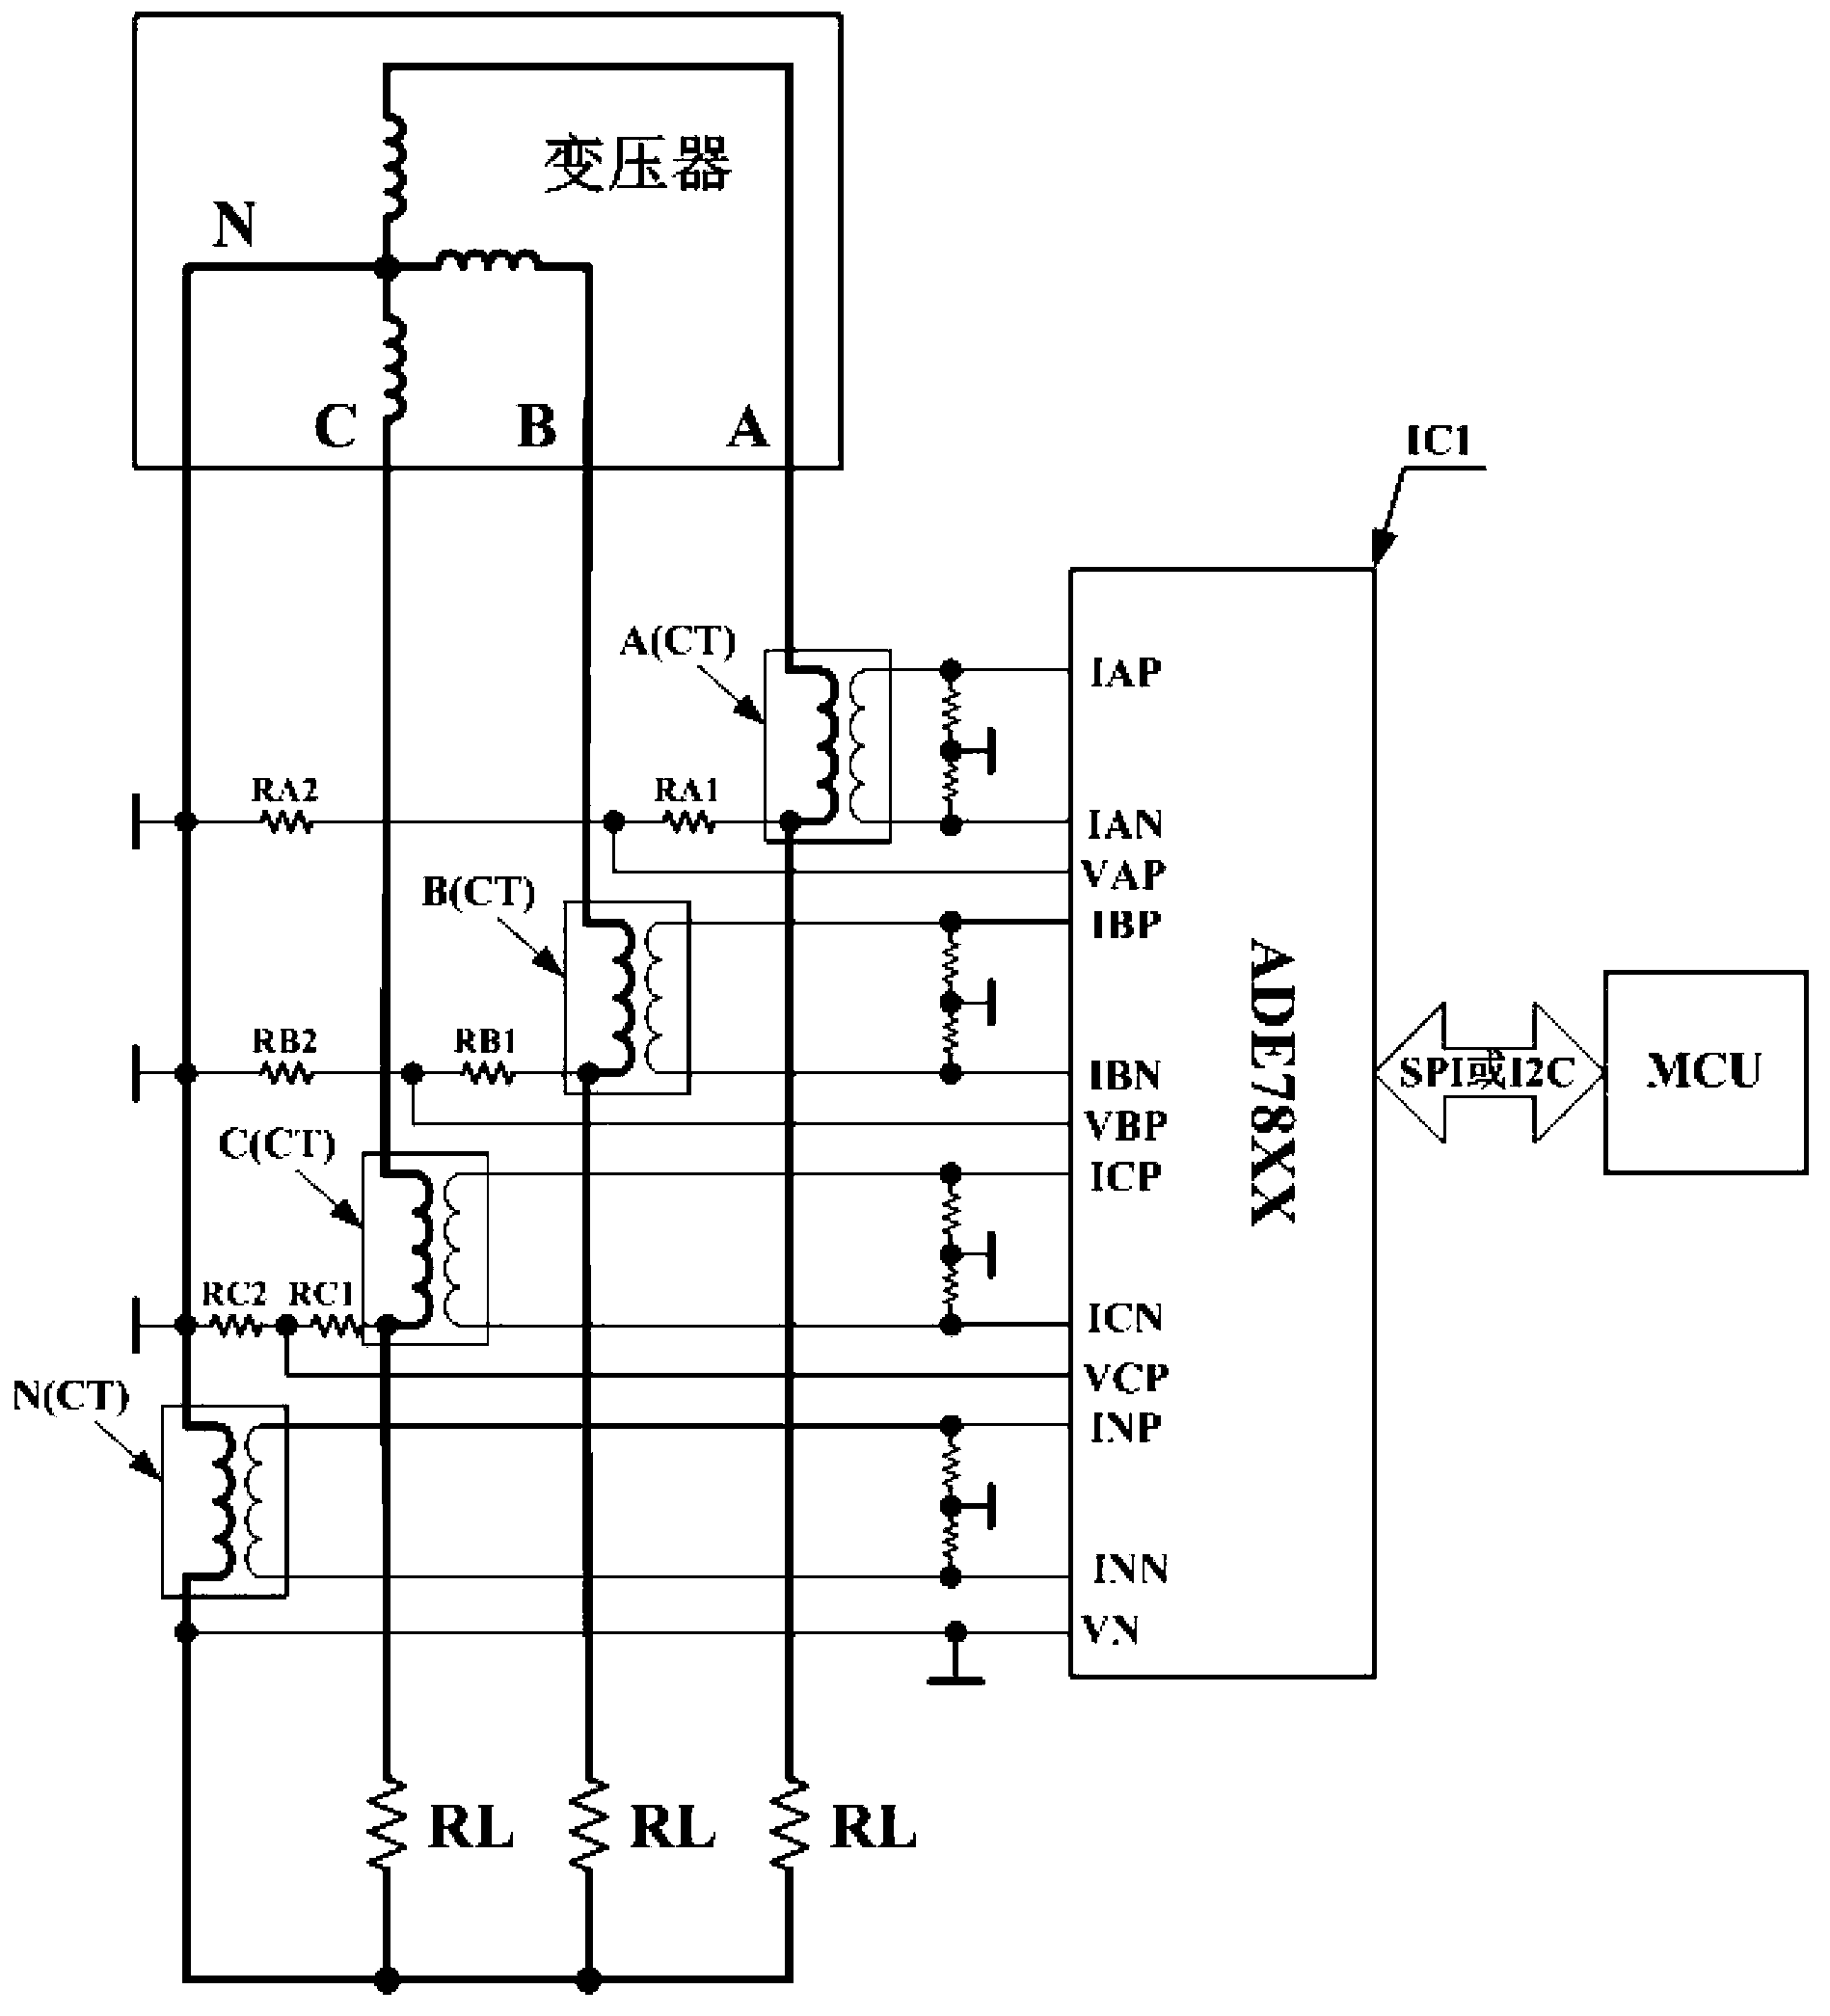 Isolated serial peripheral interface (SPI) bus electric energy measuring module and APLC electricity meter